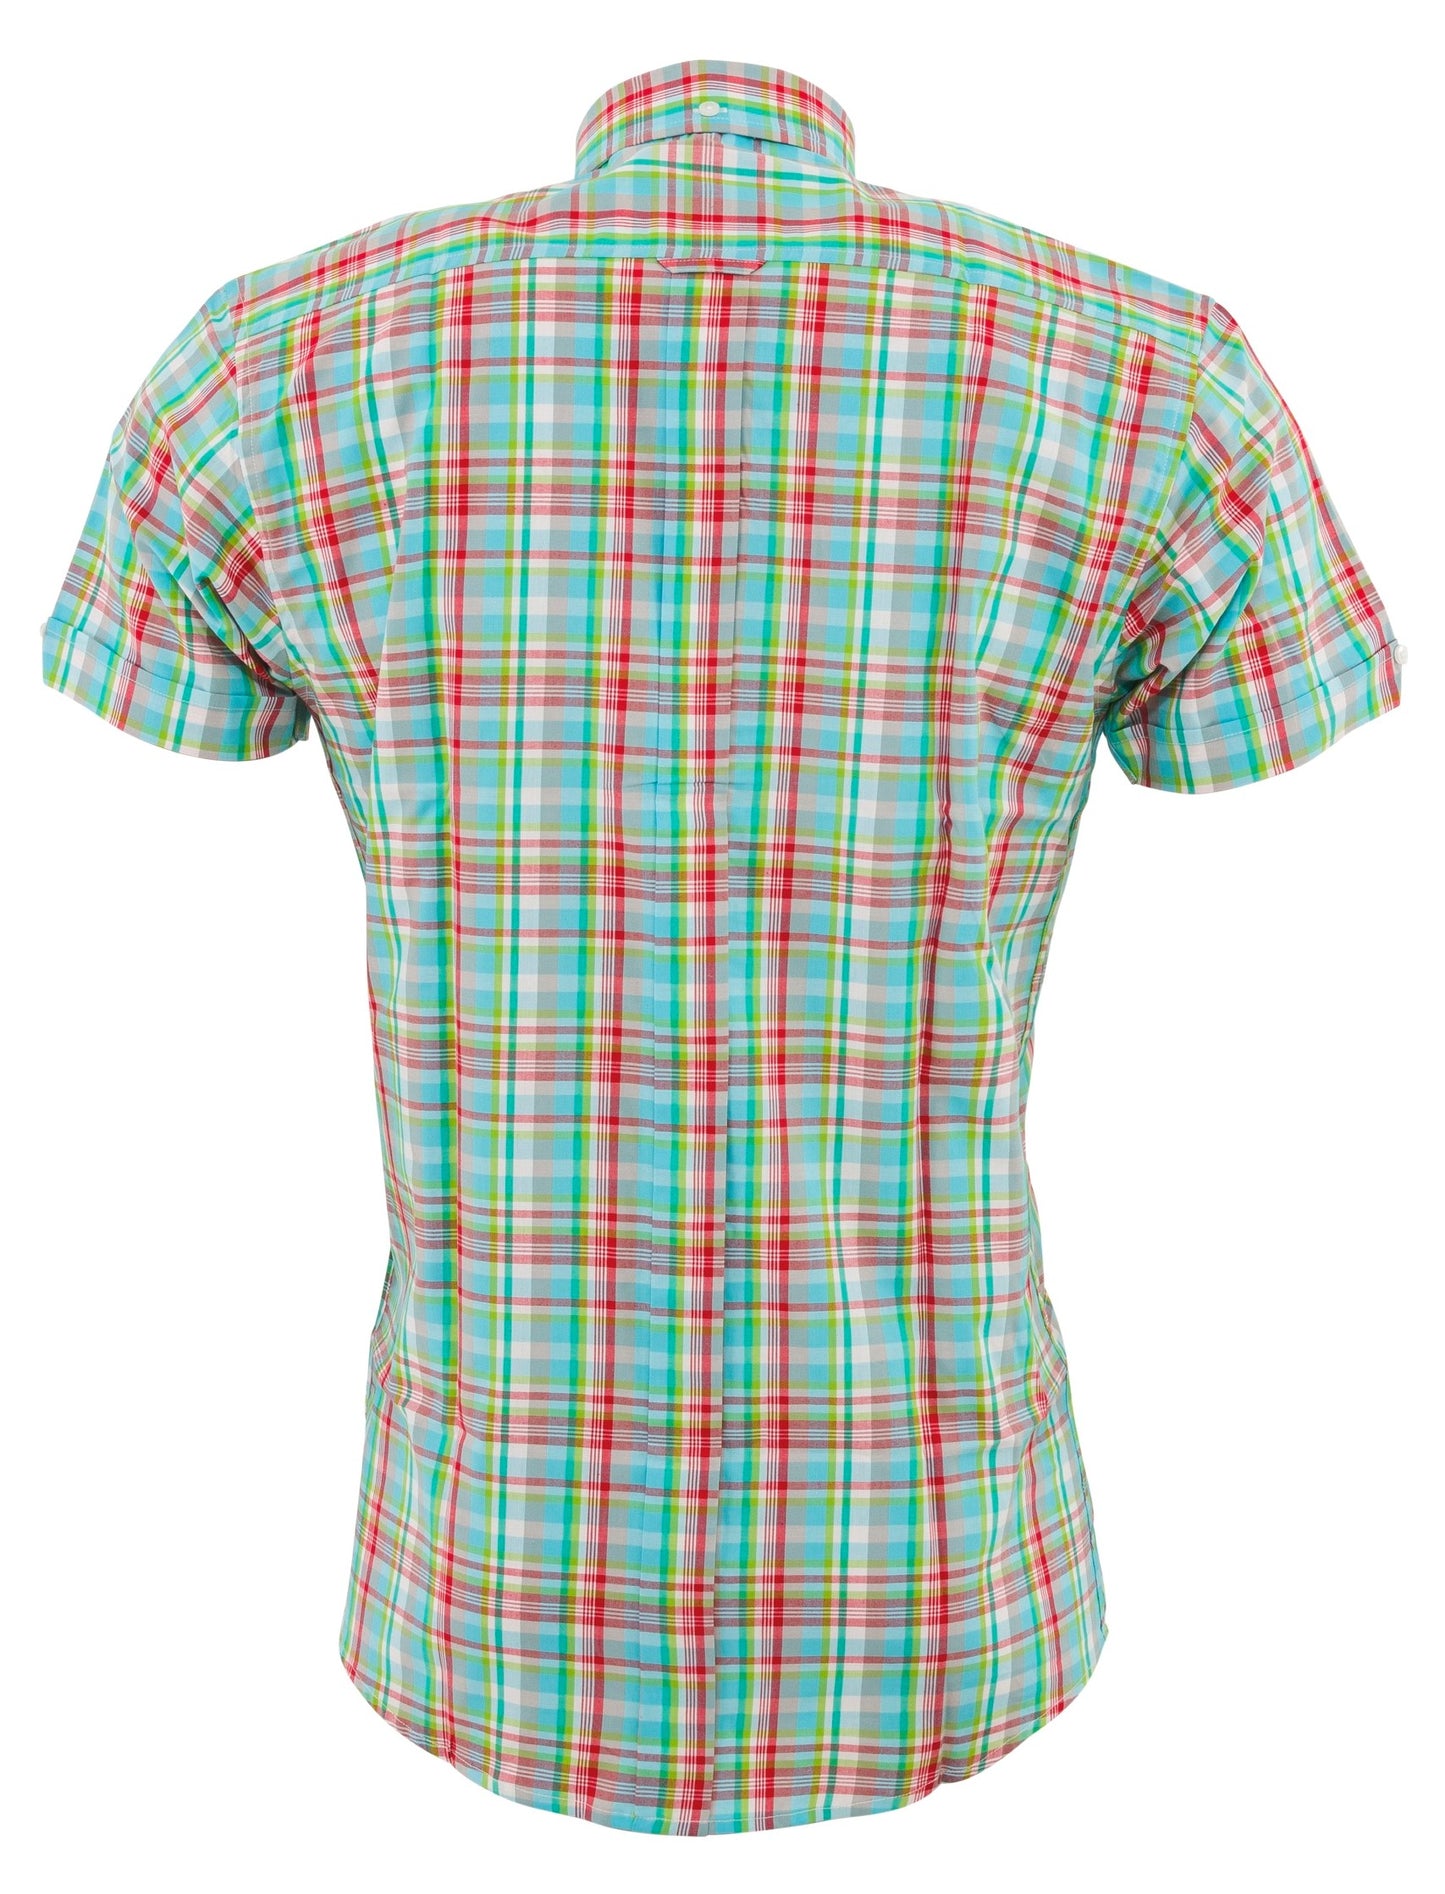 Relco Mens Multi Green Checked Short Sleeved Button Down Shirts